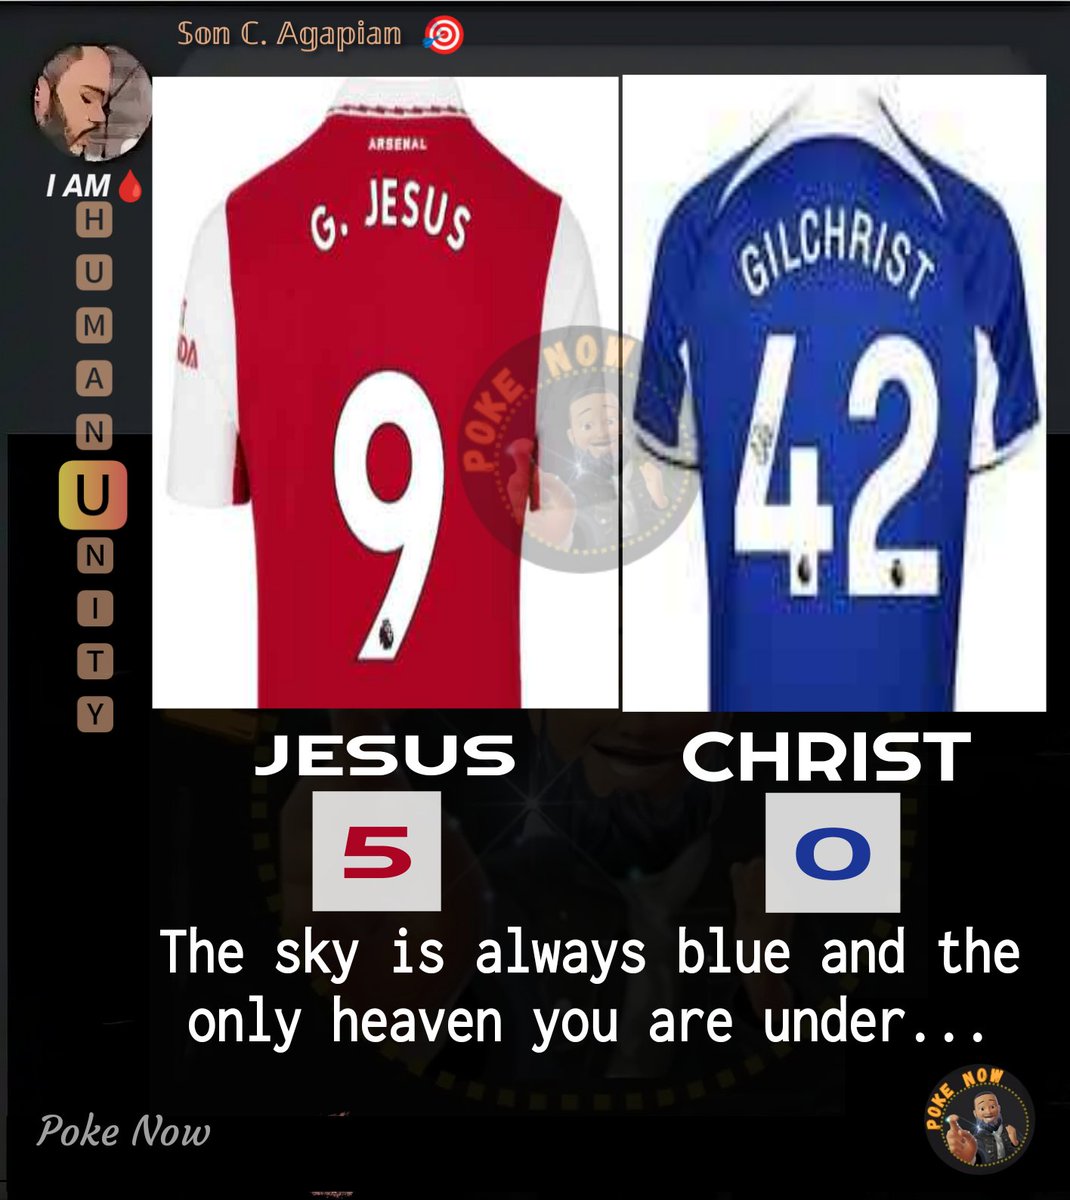 The #real #JesusChrist  played for both teams under open #heavens...
The sky is always blue...🤣🤣🤣
#arsenal
#chelsea
#Gunners
#Sky
#blue
#arsenalfootballclub 
#chealseafc
@Pokenow9
#pokenow
#ARSCFC